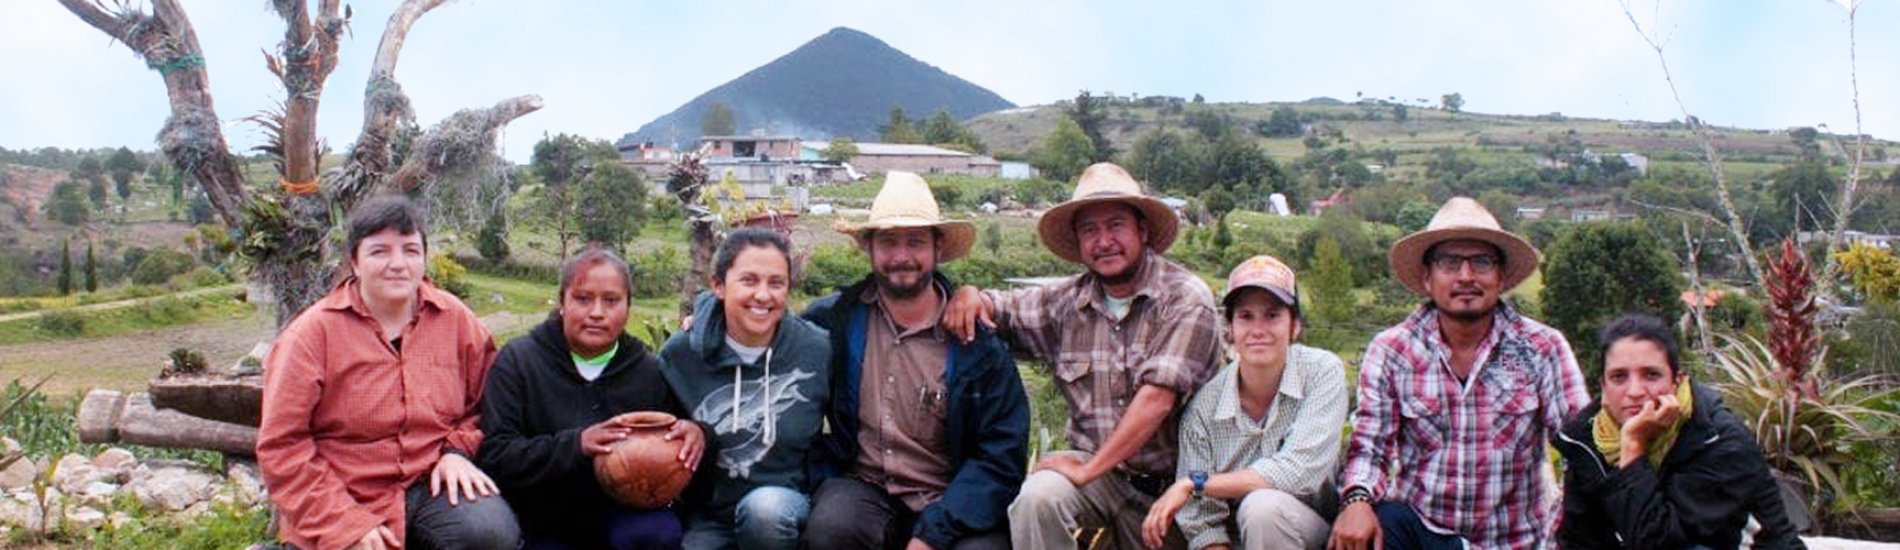 Research team of the Tonaltepec Ethnoarchaeological Project led by Dr. Verónica Pérez Rodriguez